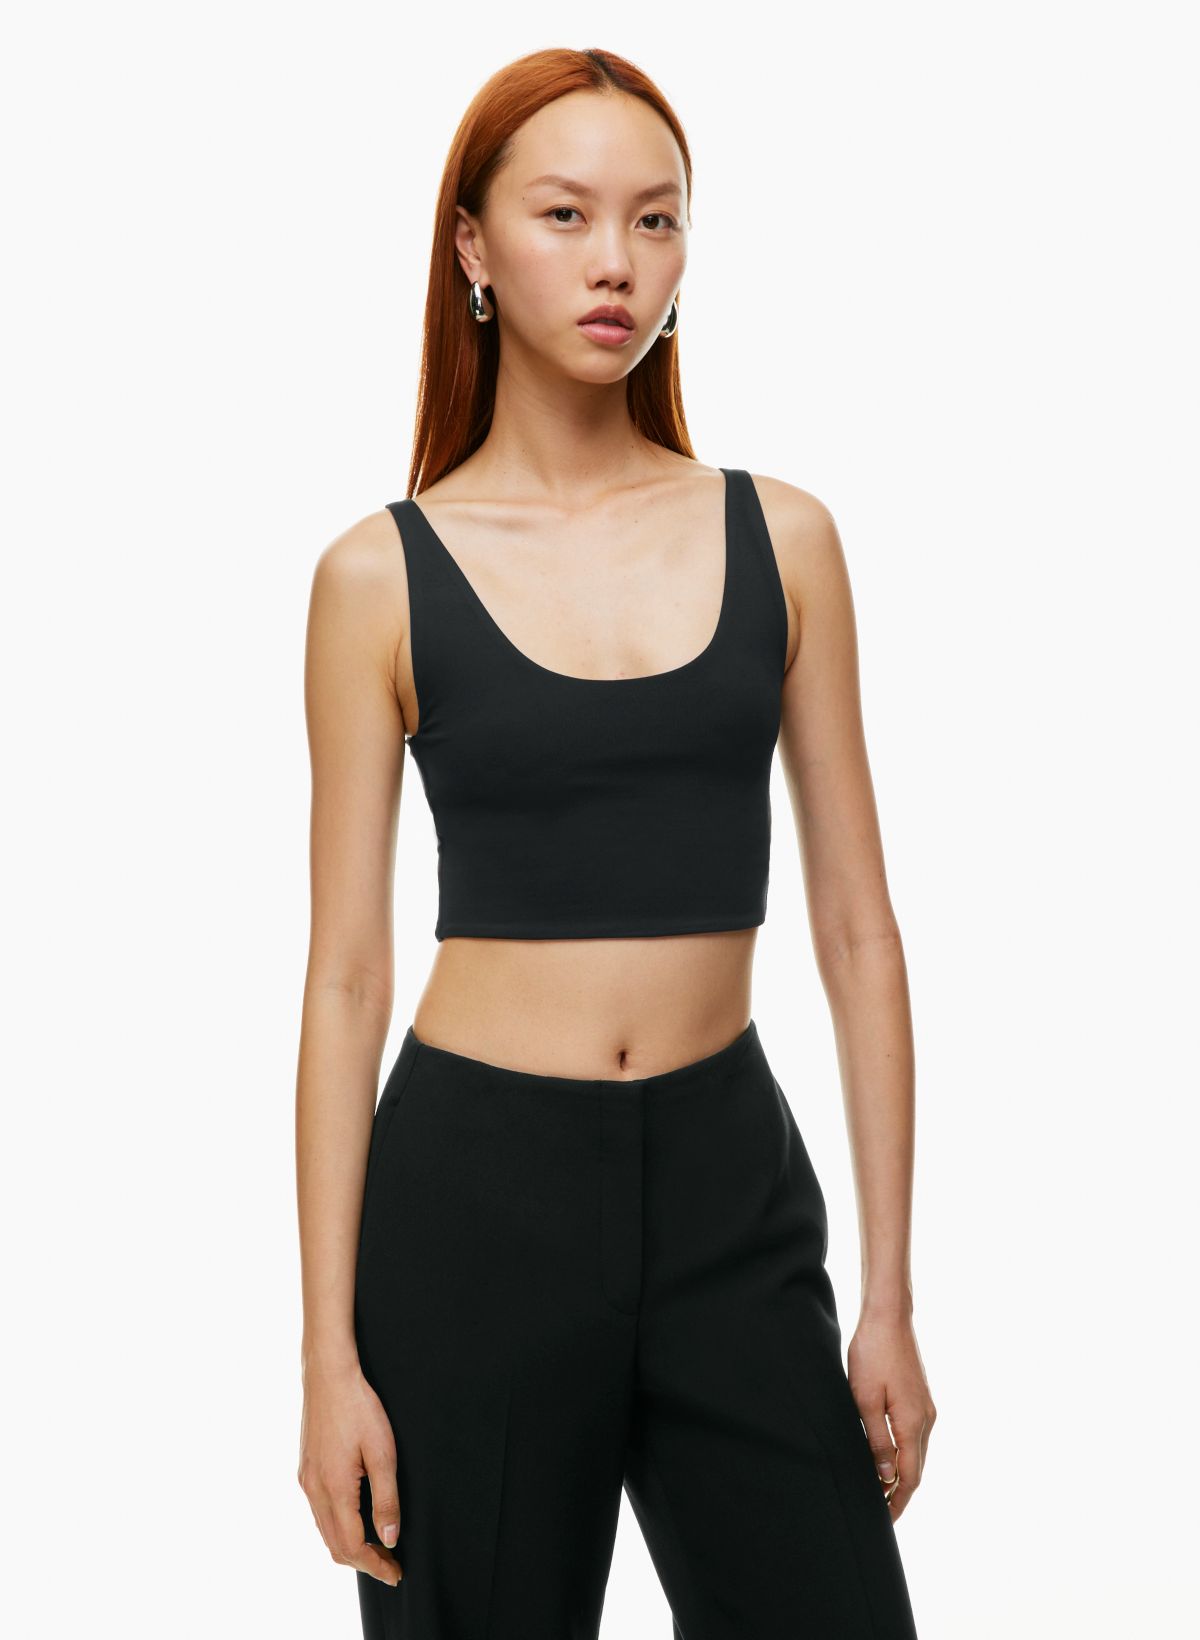 are the babaton contour muscle tanks see thru? would i need to